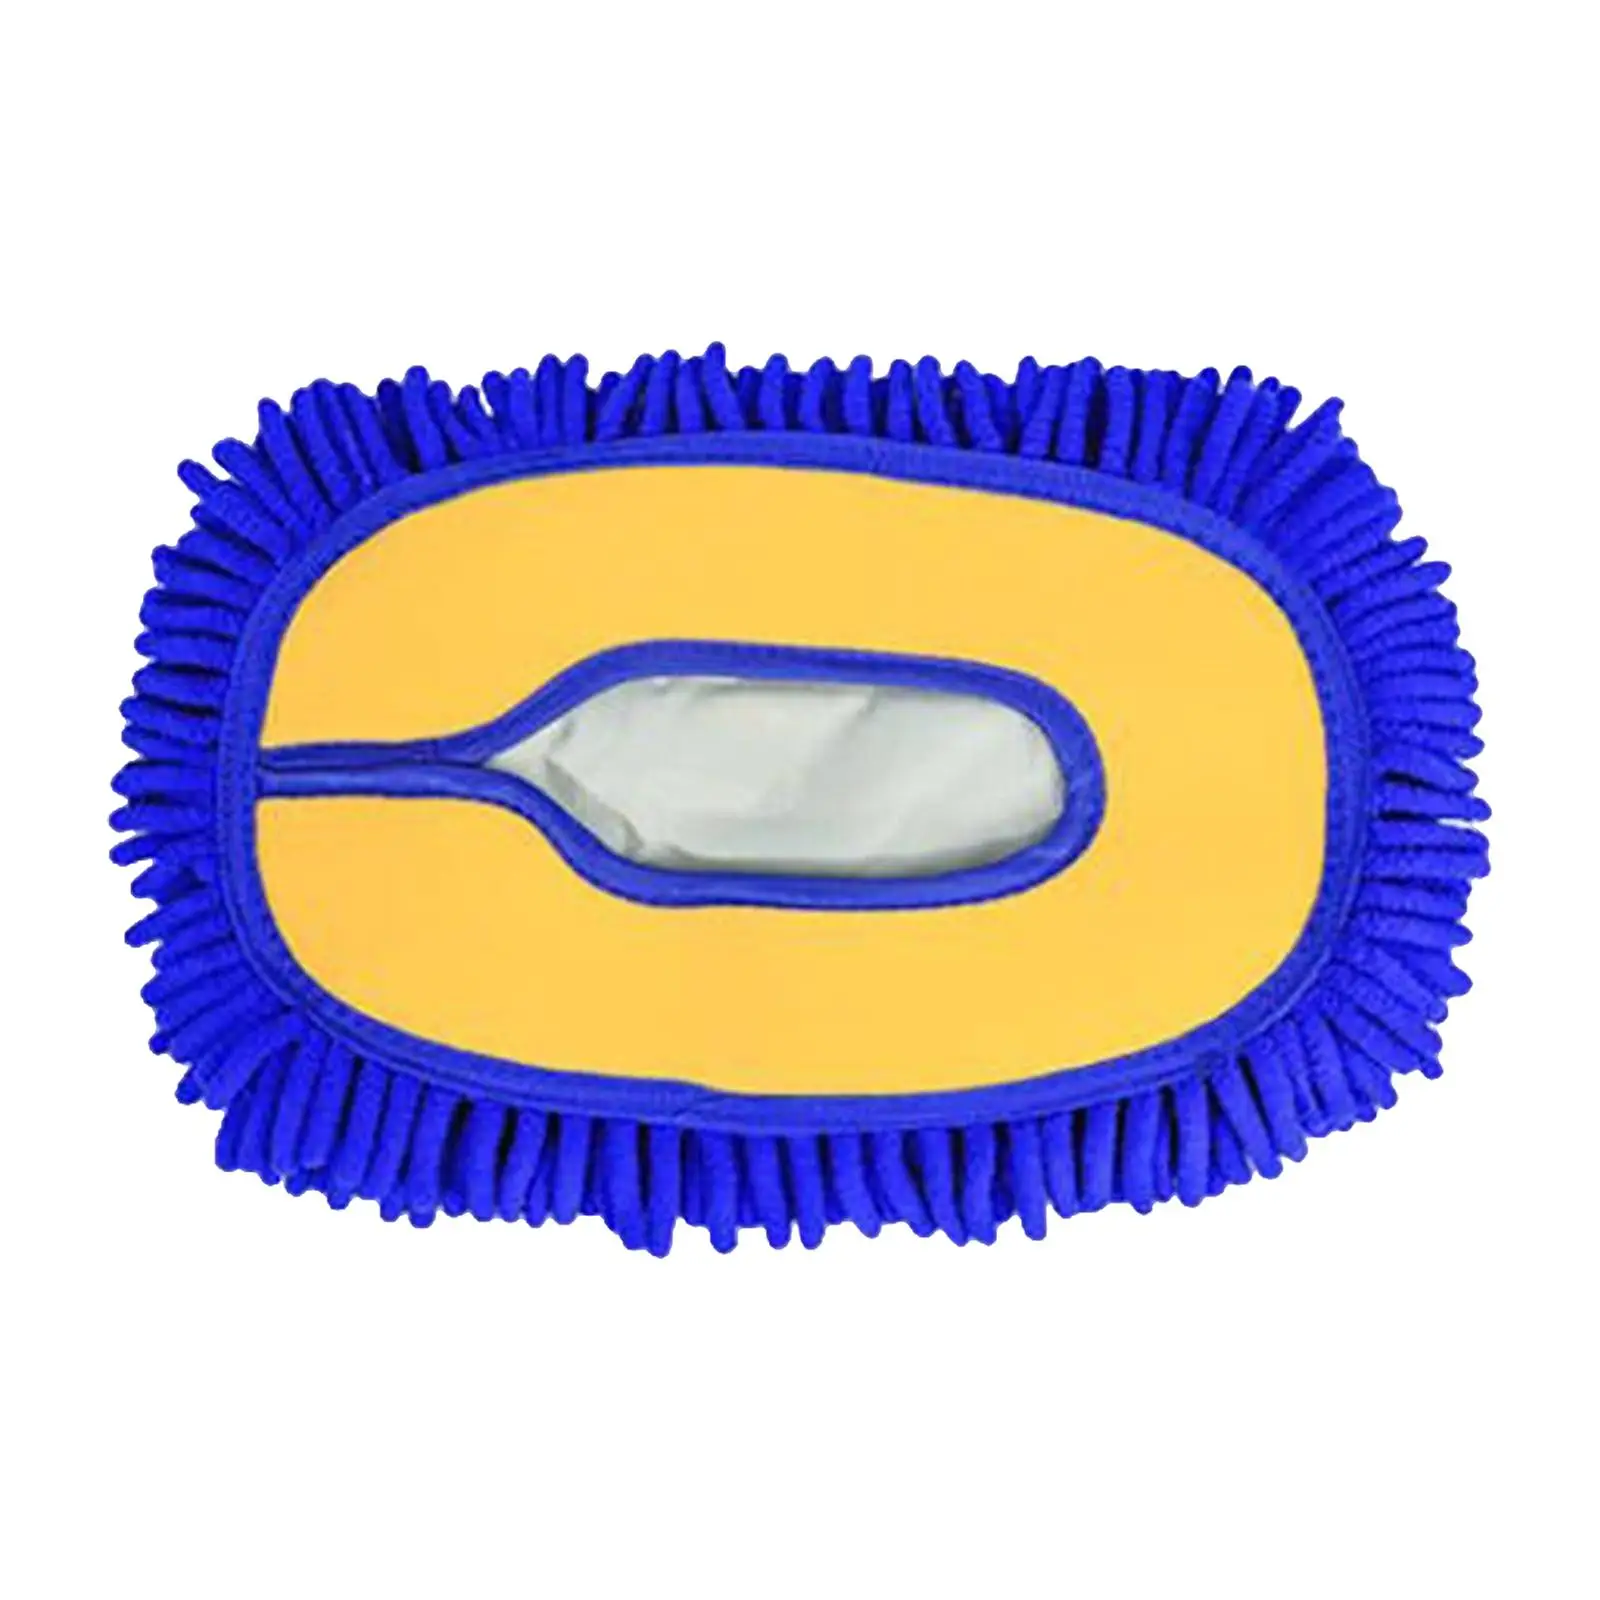 Microfiber Car Wash Brush Replacement Head Accessory Highly Absorbent Soft